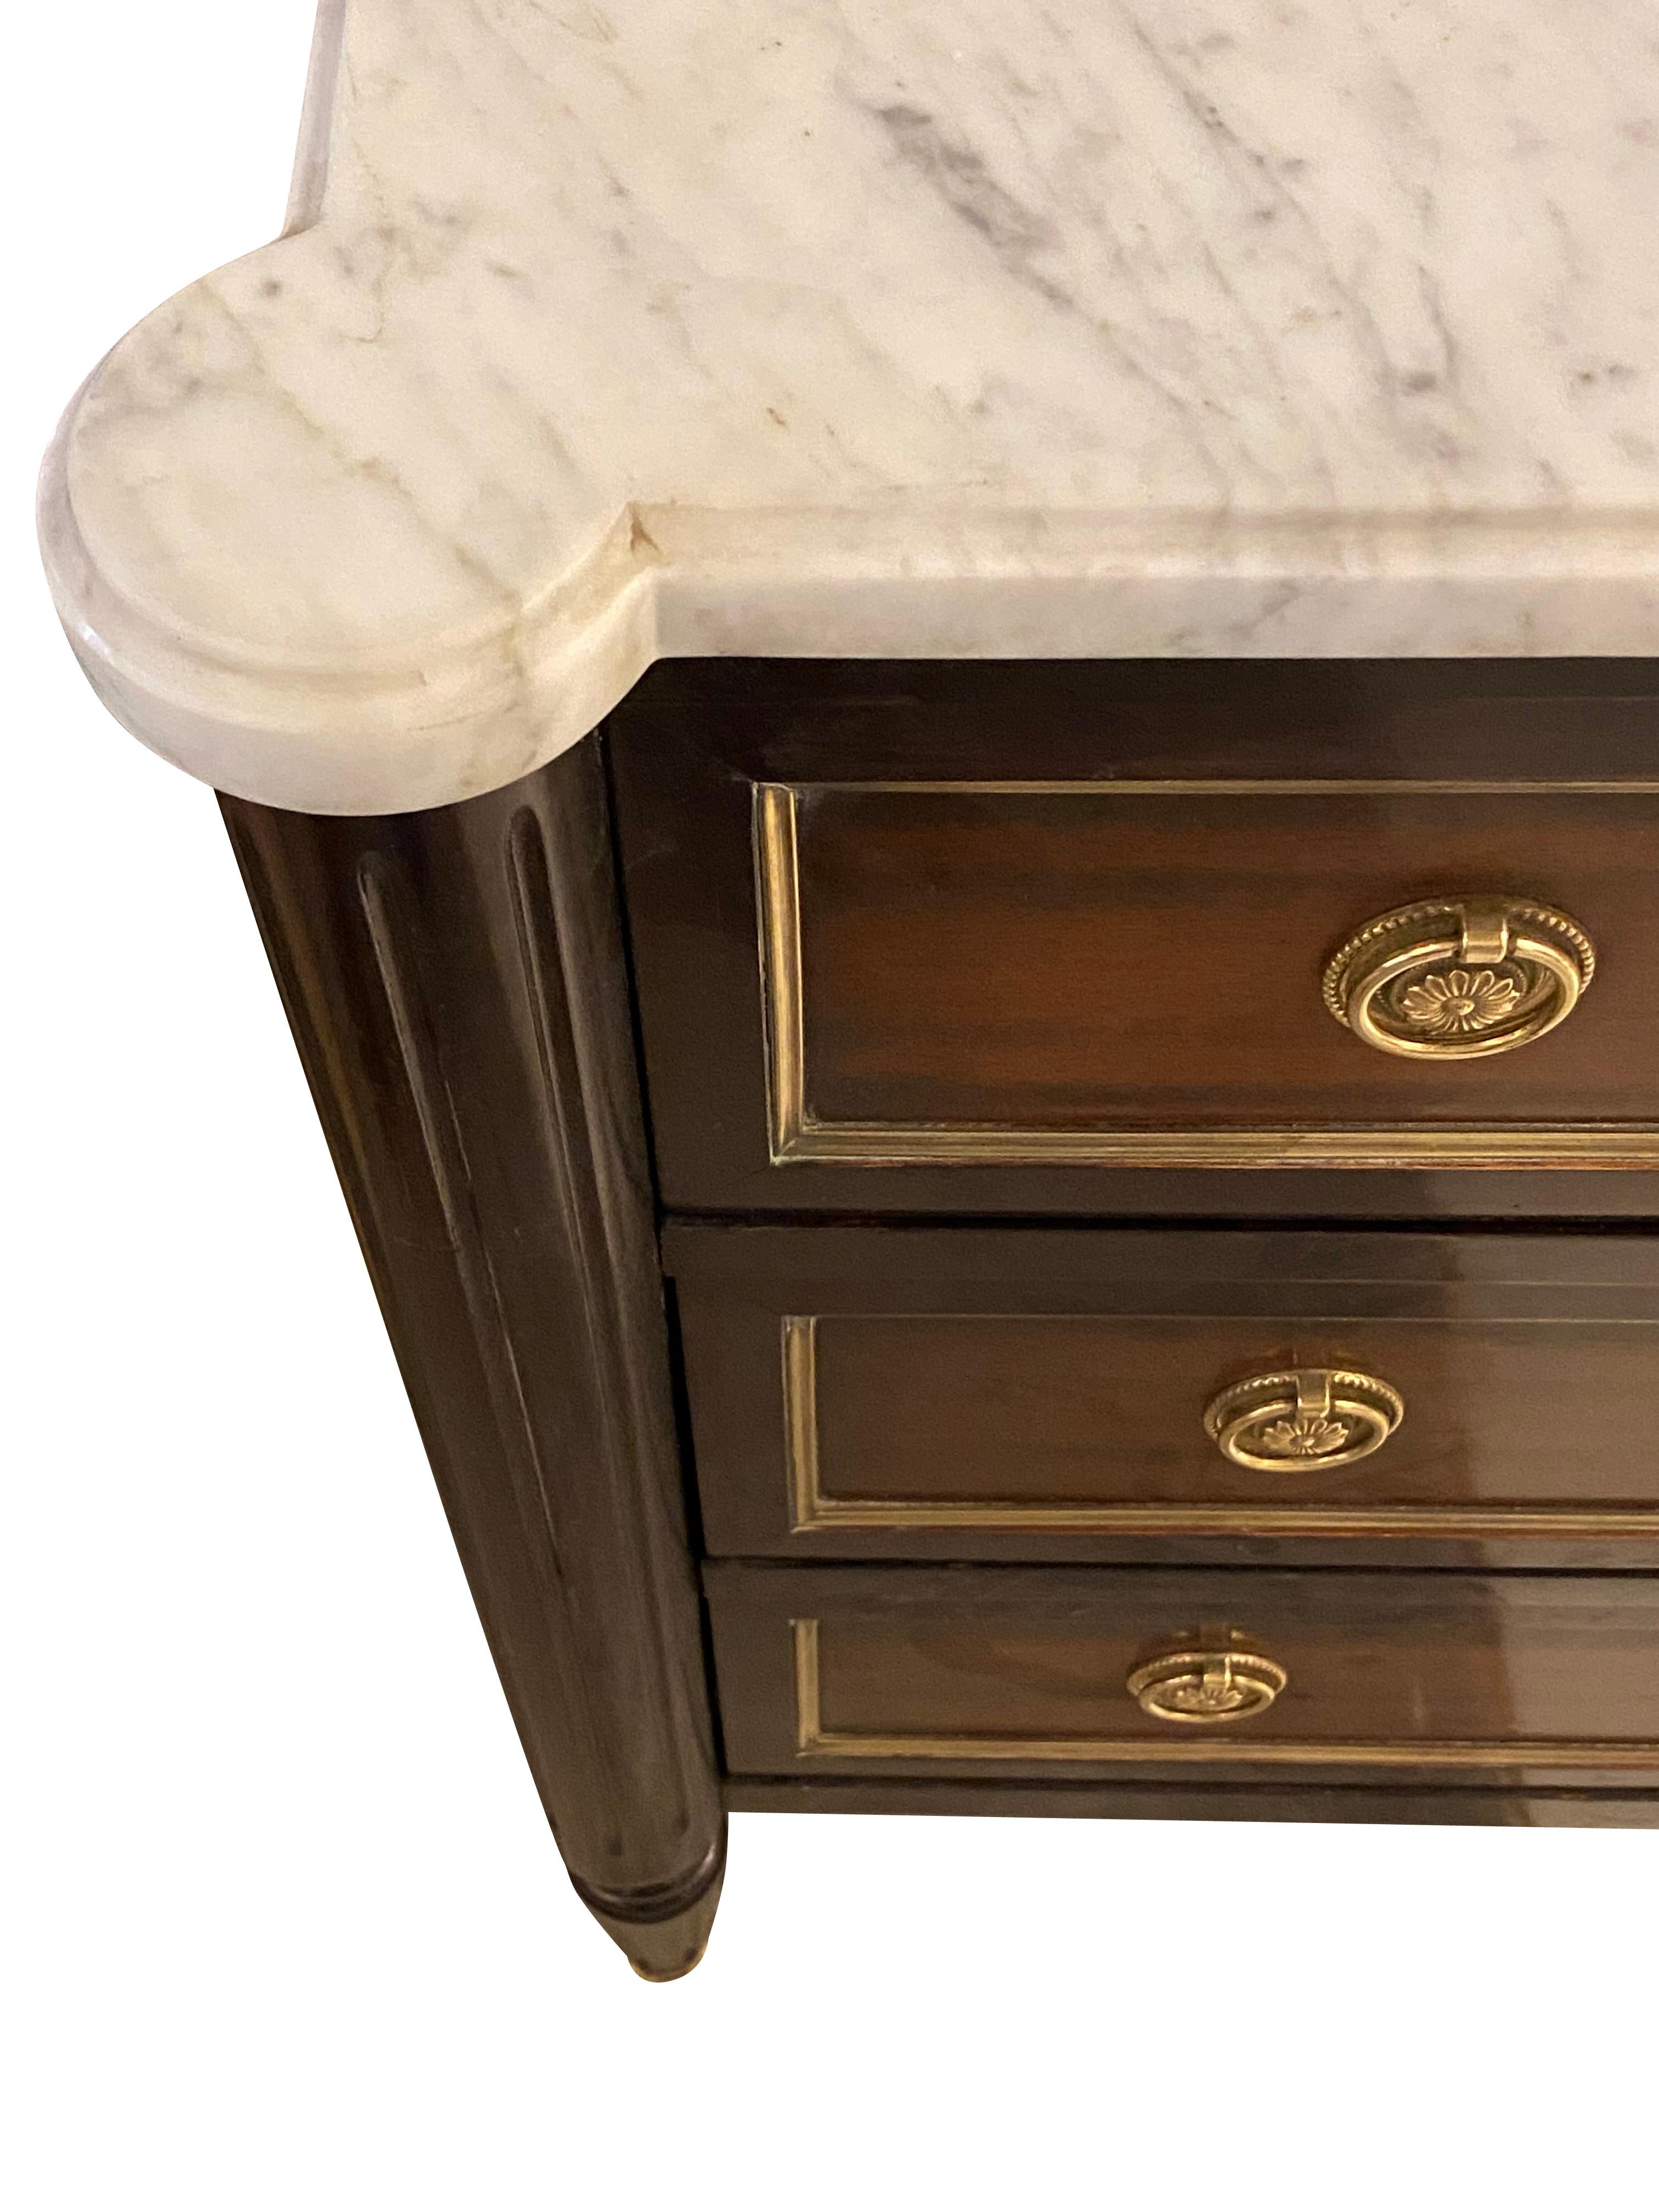 1980s French three drawer commode in the style of French Empire
Walnut with ebonized trim detailing
Carrara marble top with rounded front corners
Traditional hardware trim
Ridged front legs with sabot
Recessed gold gilt trim.
  